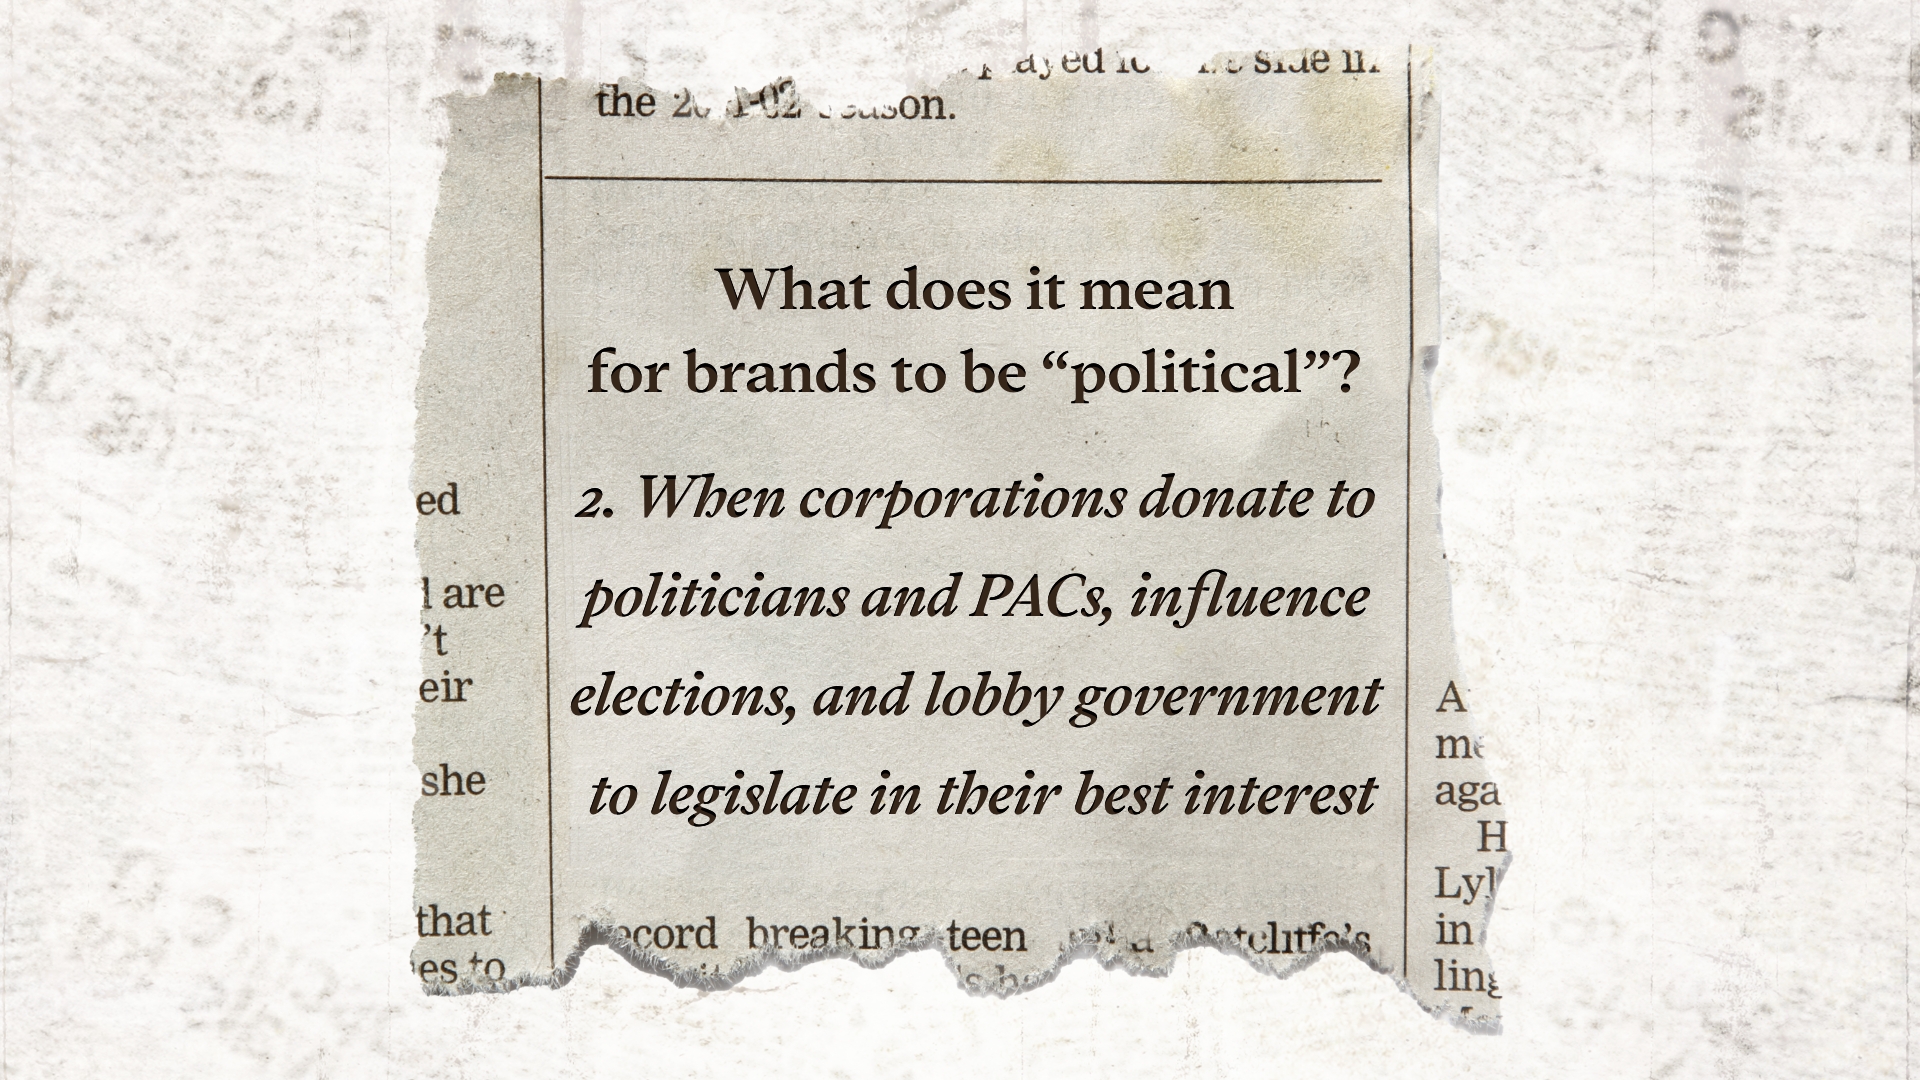 What does it mean for brands to be political? When corporations influence elections